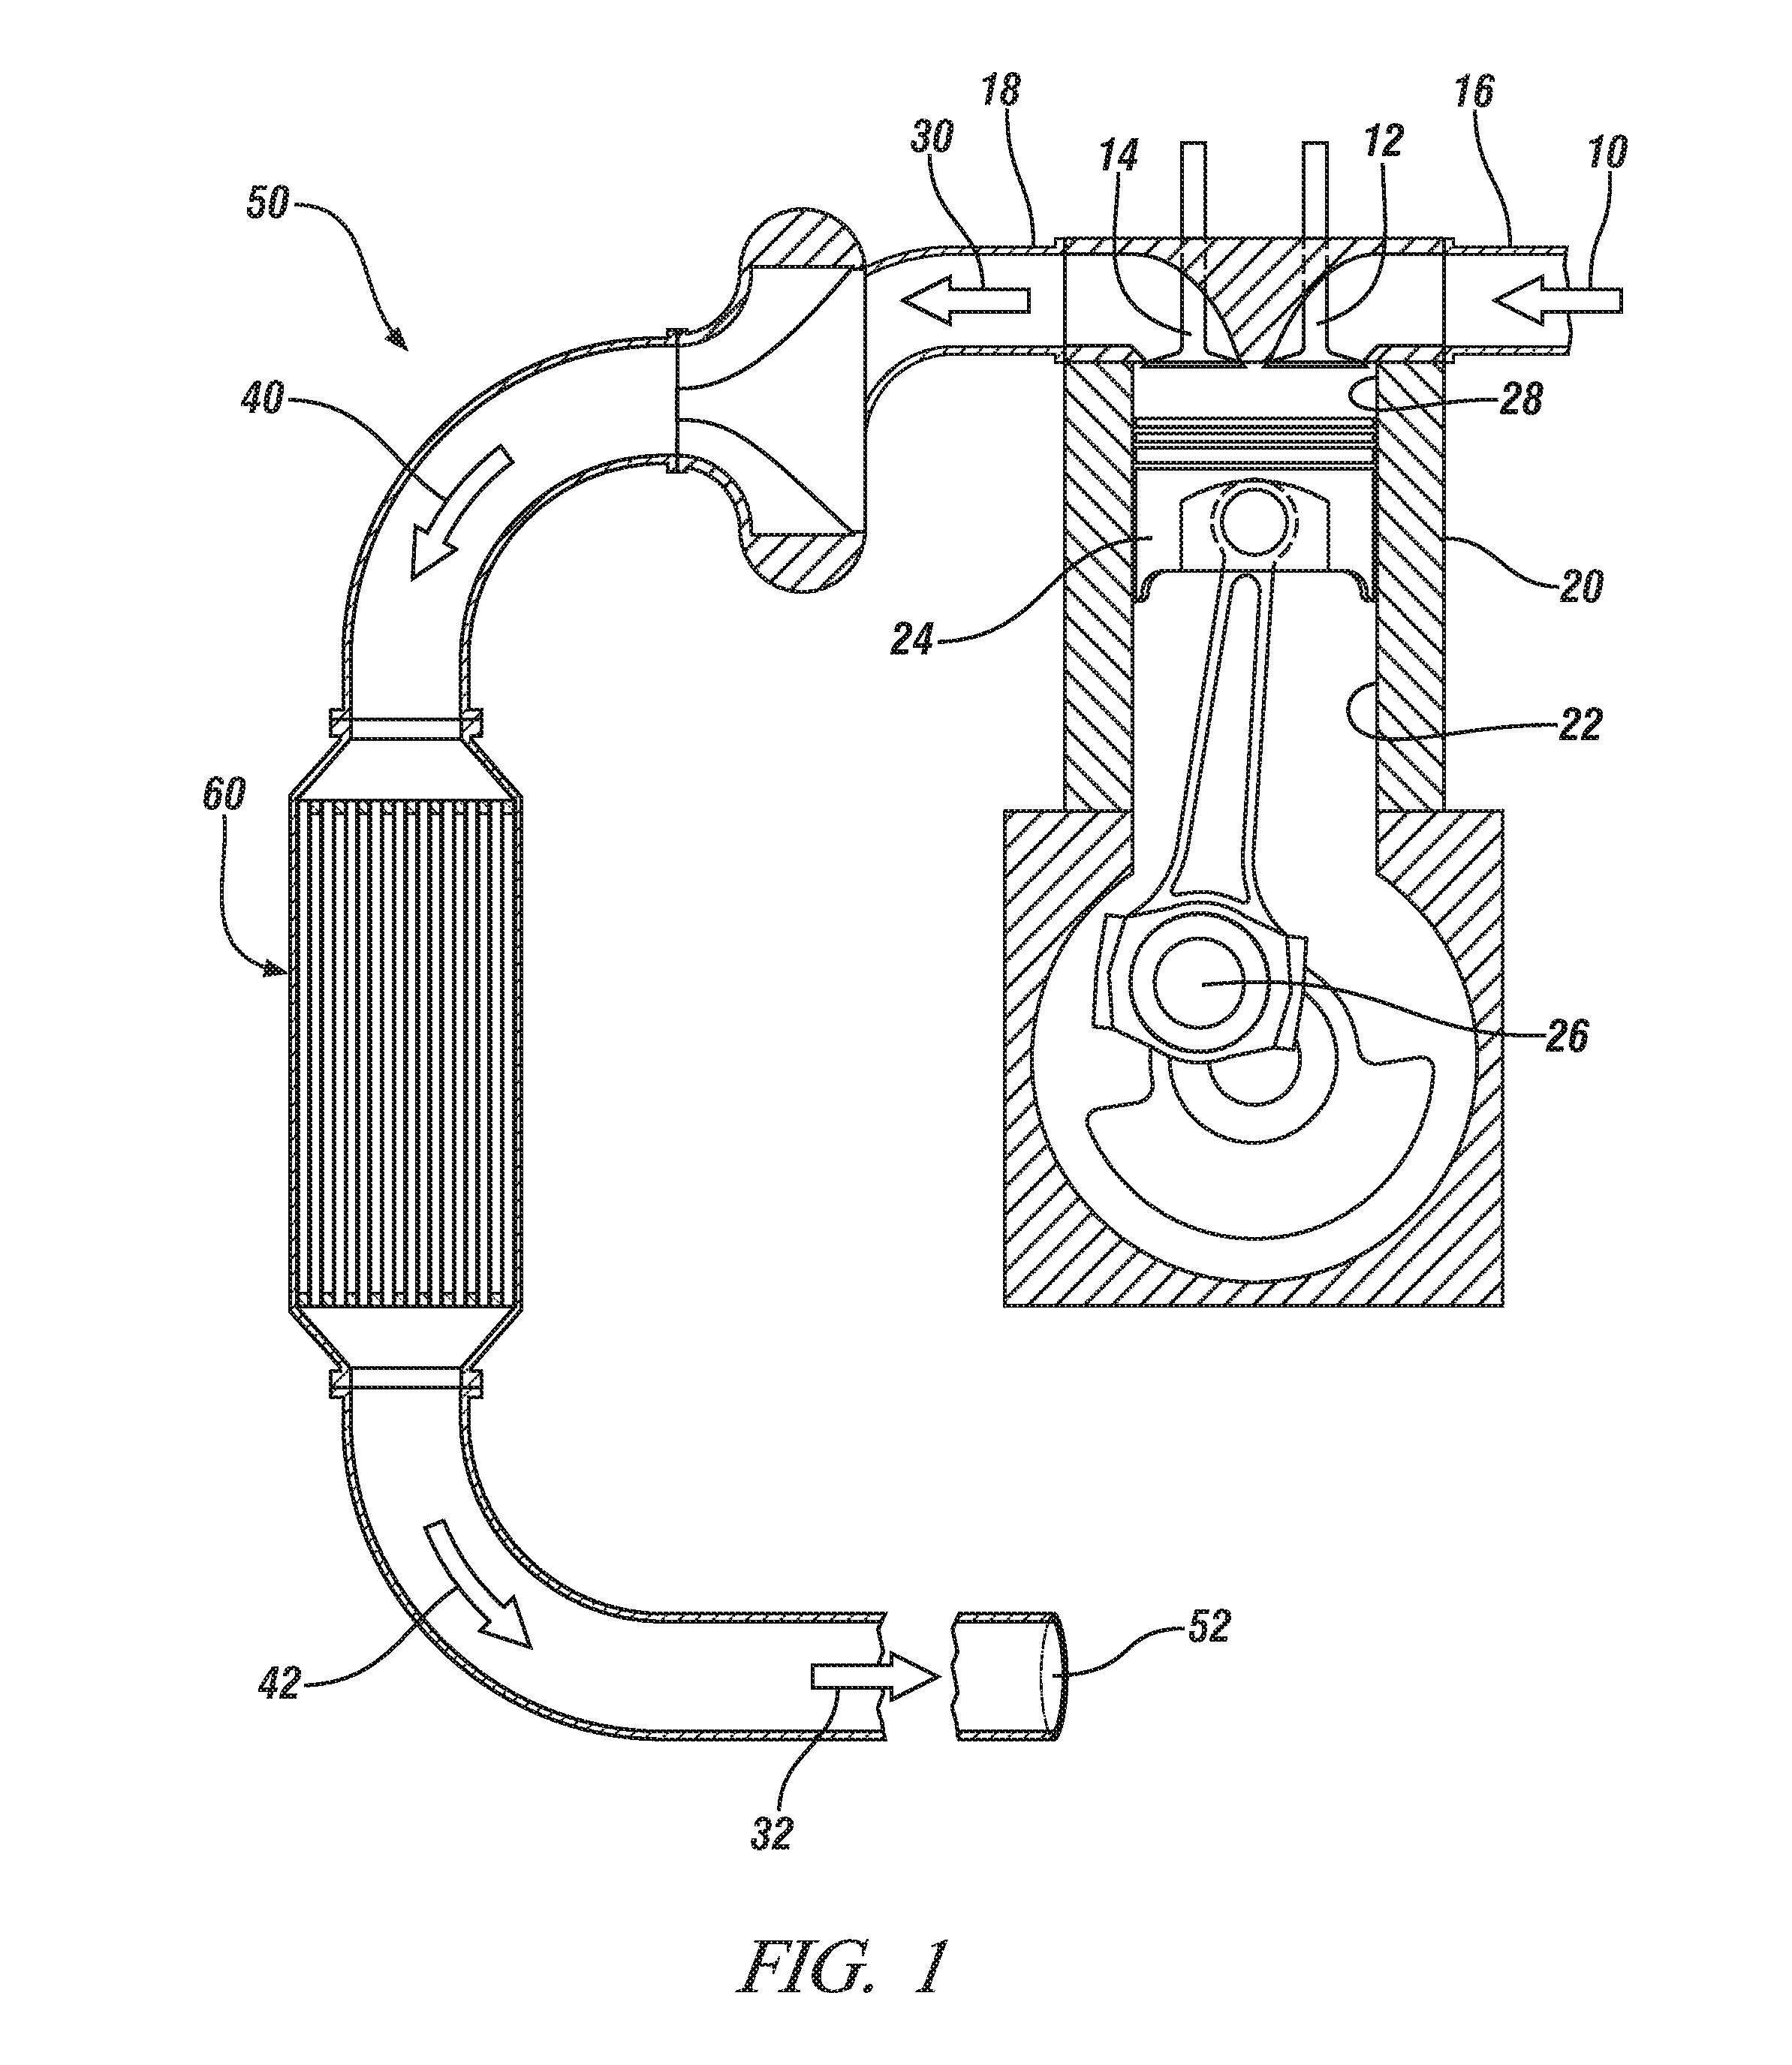 Oxidation catalysts for engines producing low temperature exhaust streams